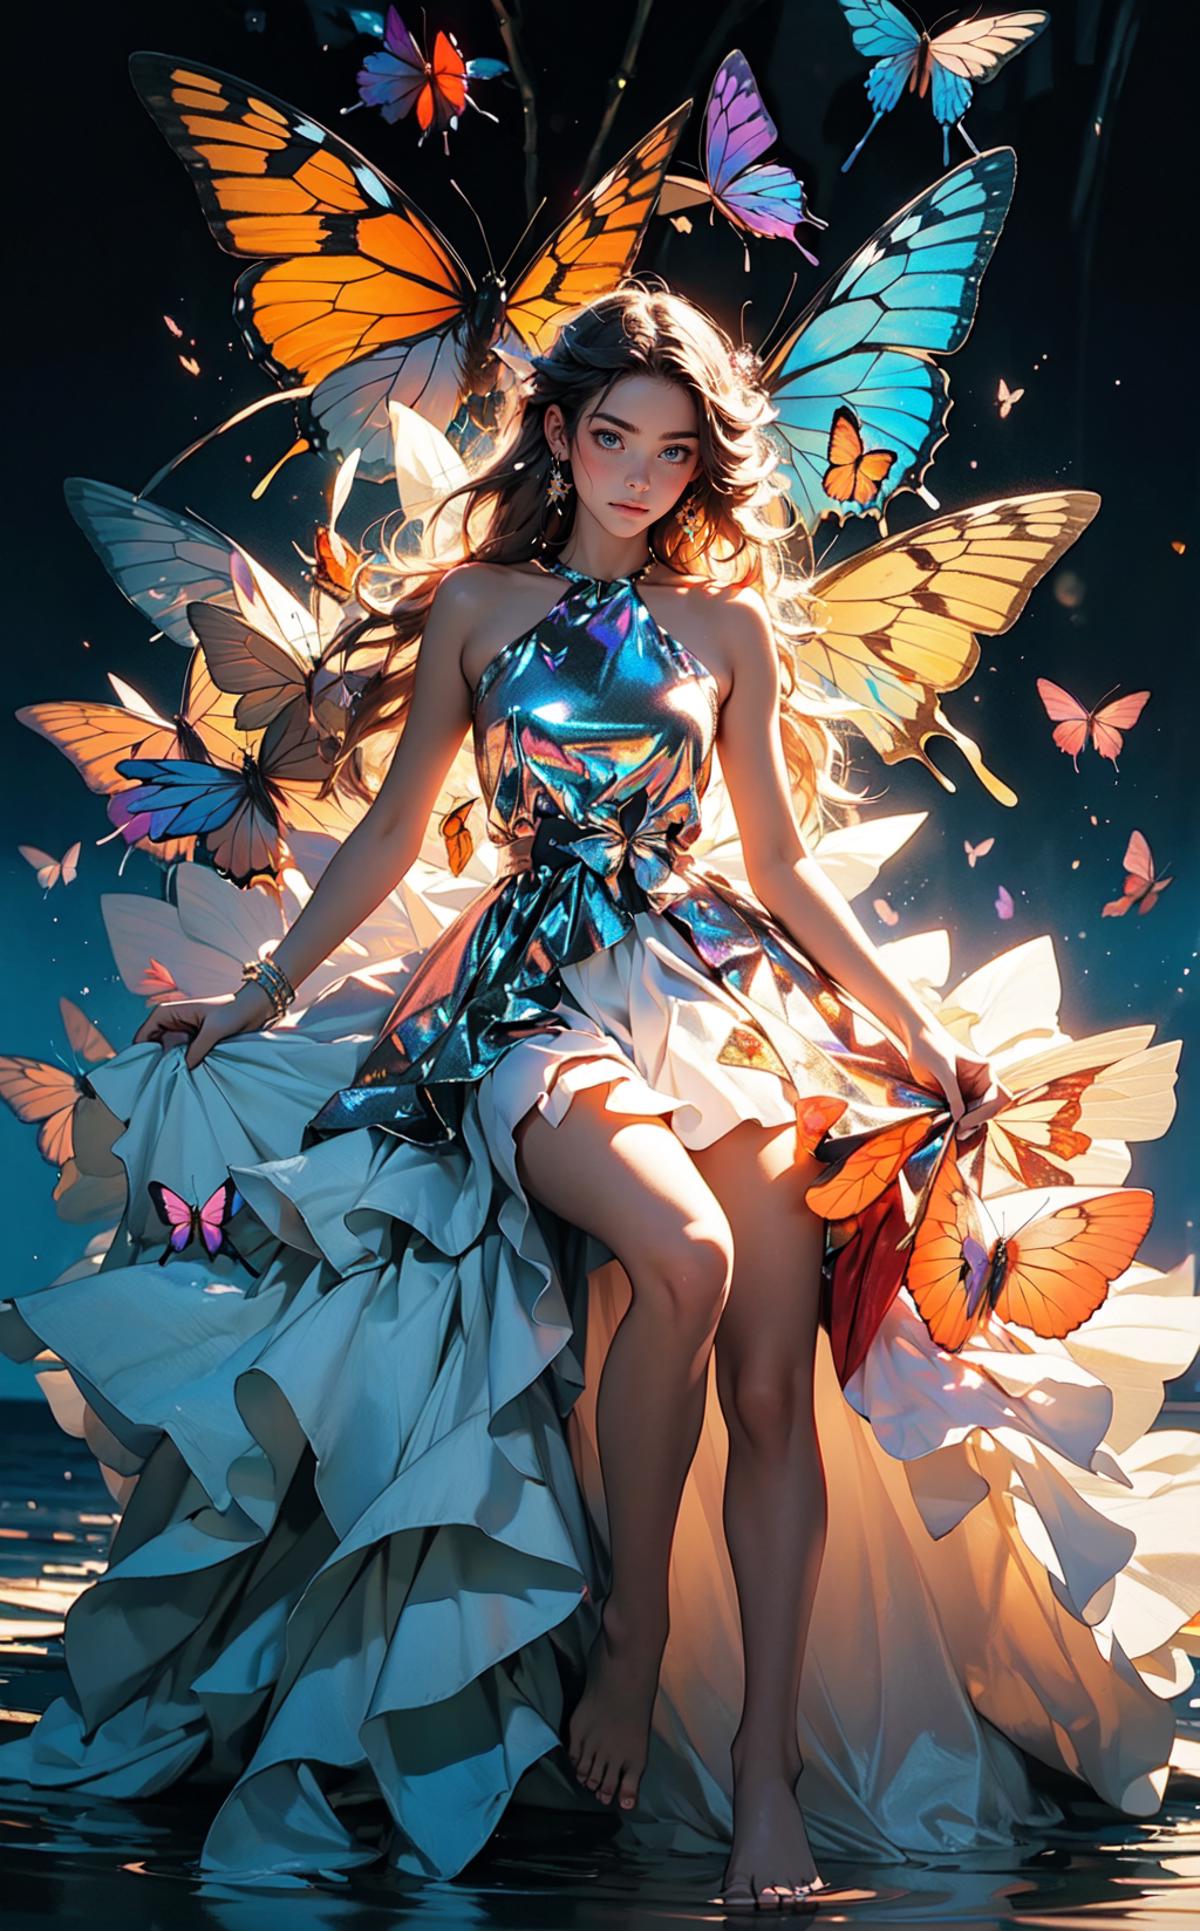 A woman wearing a silver dress with wings on her back, surrounded by butterflies.